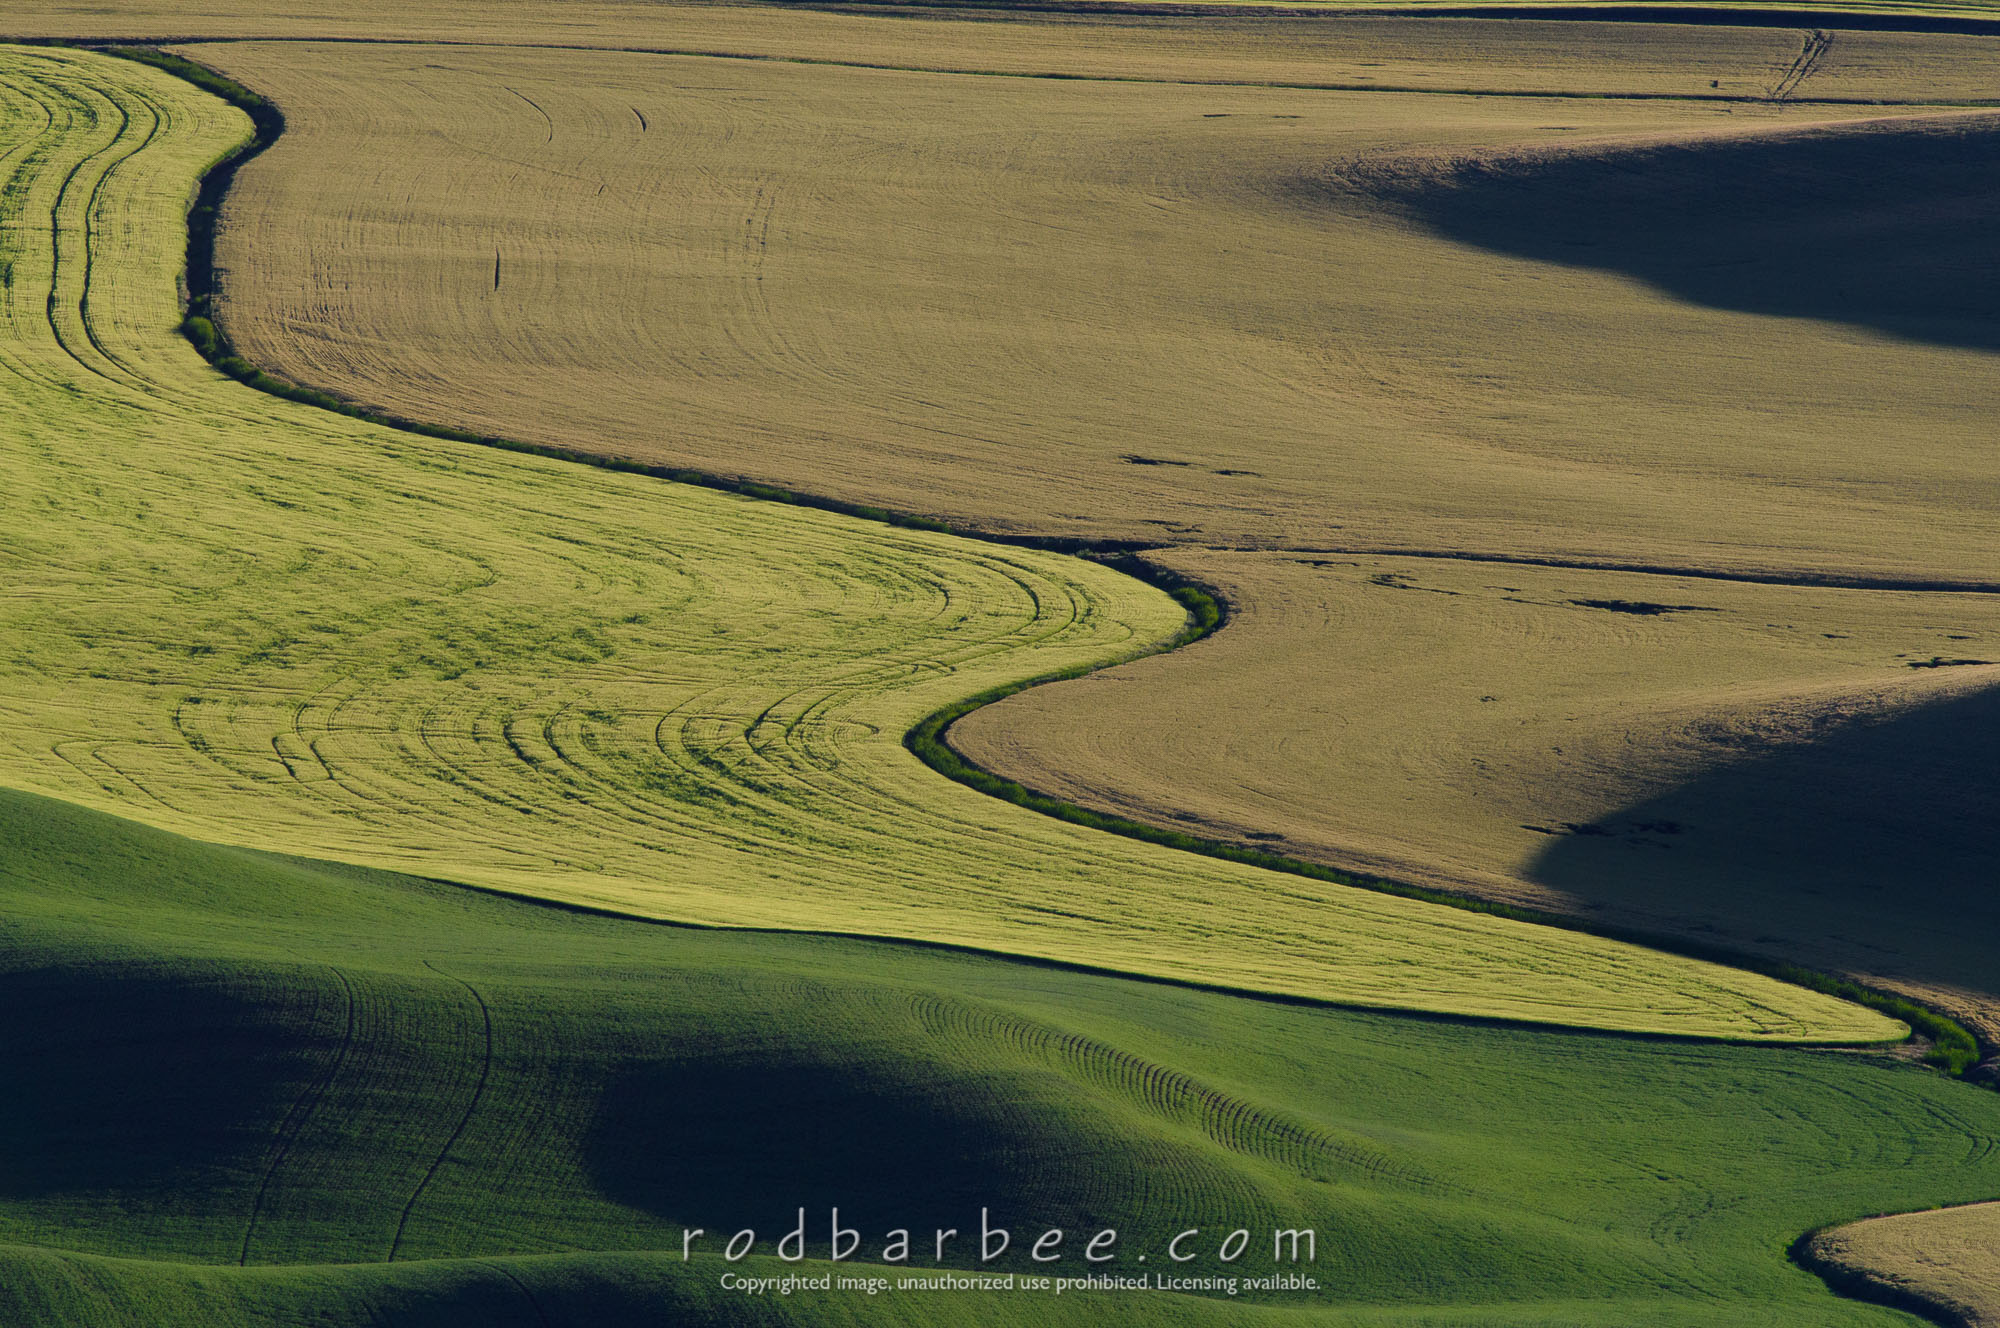 Barbee_160623_4900 |  View from Steptoe Butte